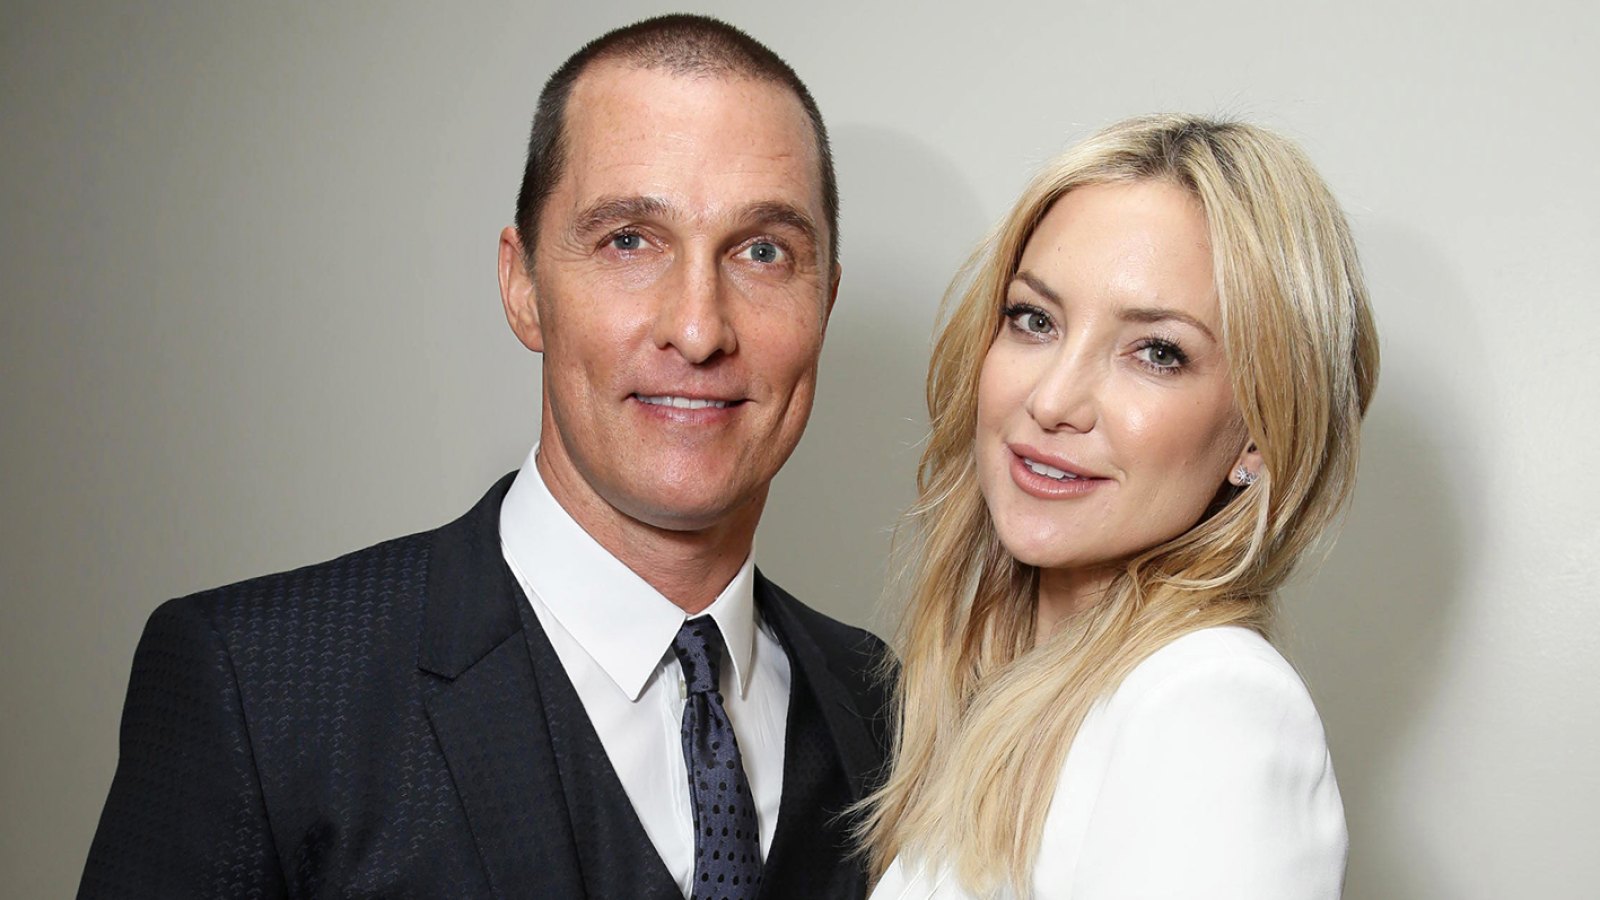 Kate Hudson Says Shirtless Matthew McConaughey Cheered Her Up After Divorce From Chris Robinson